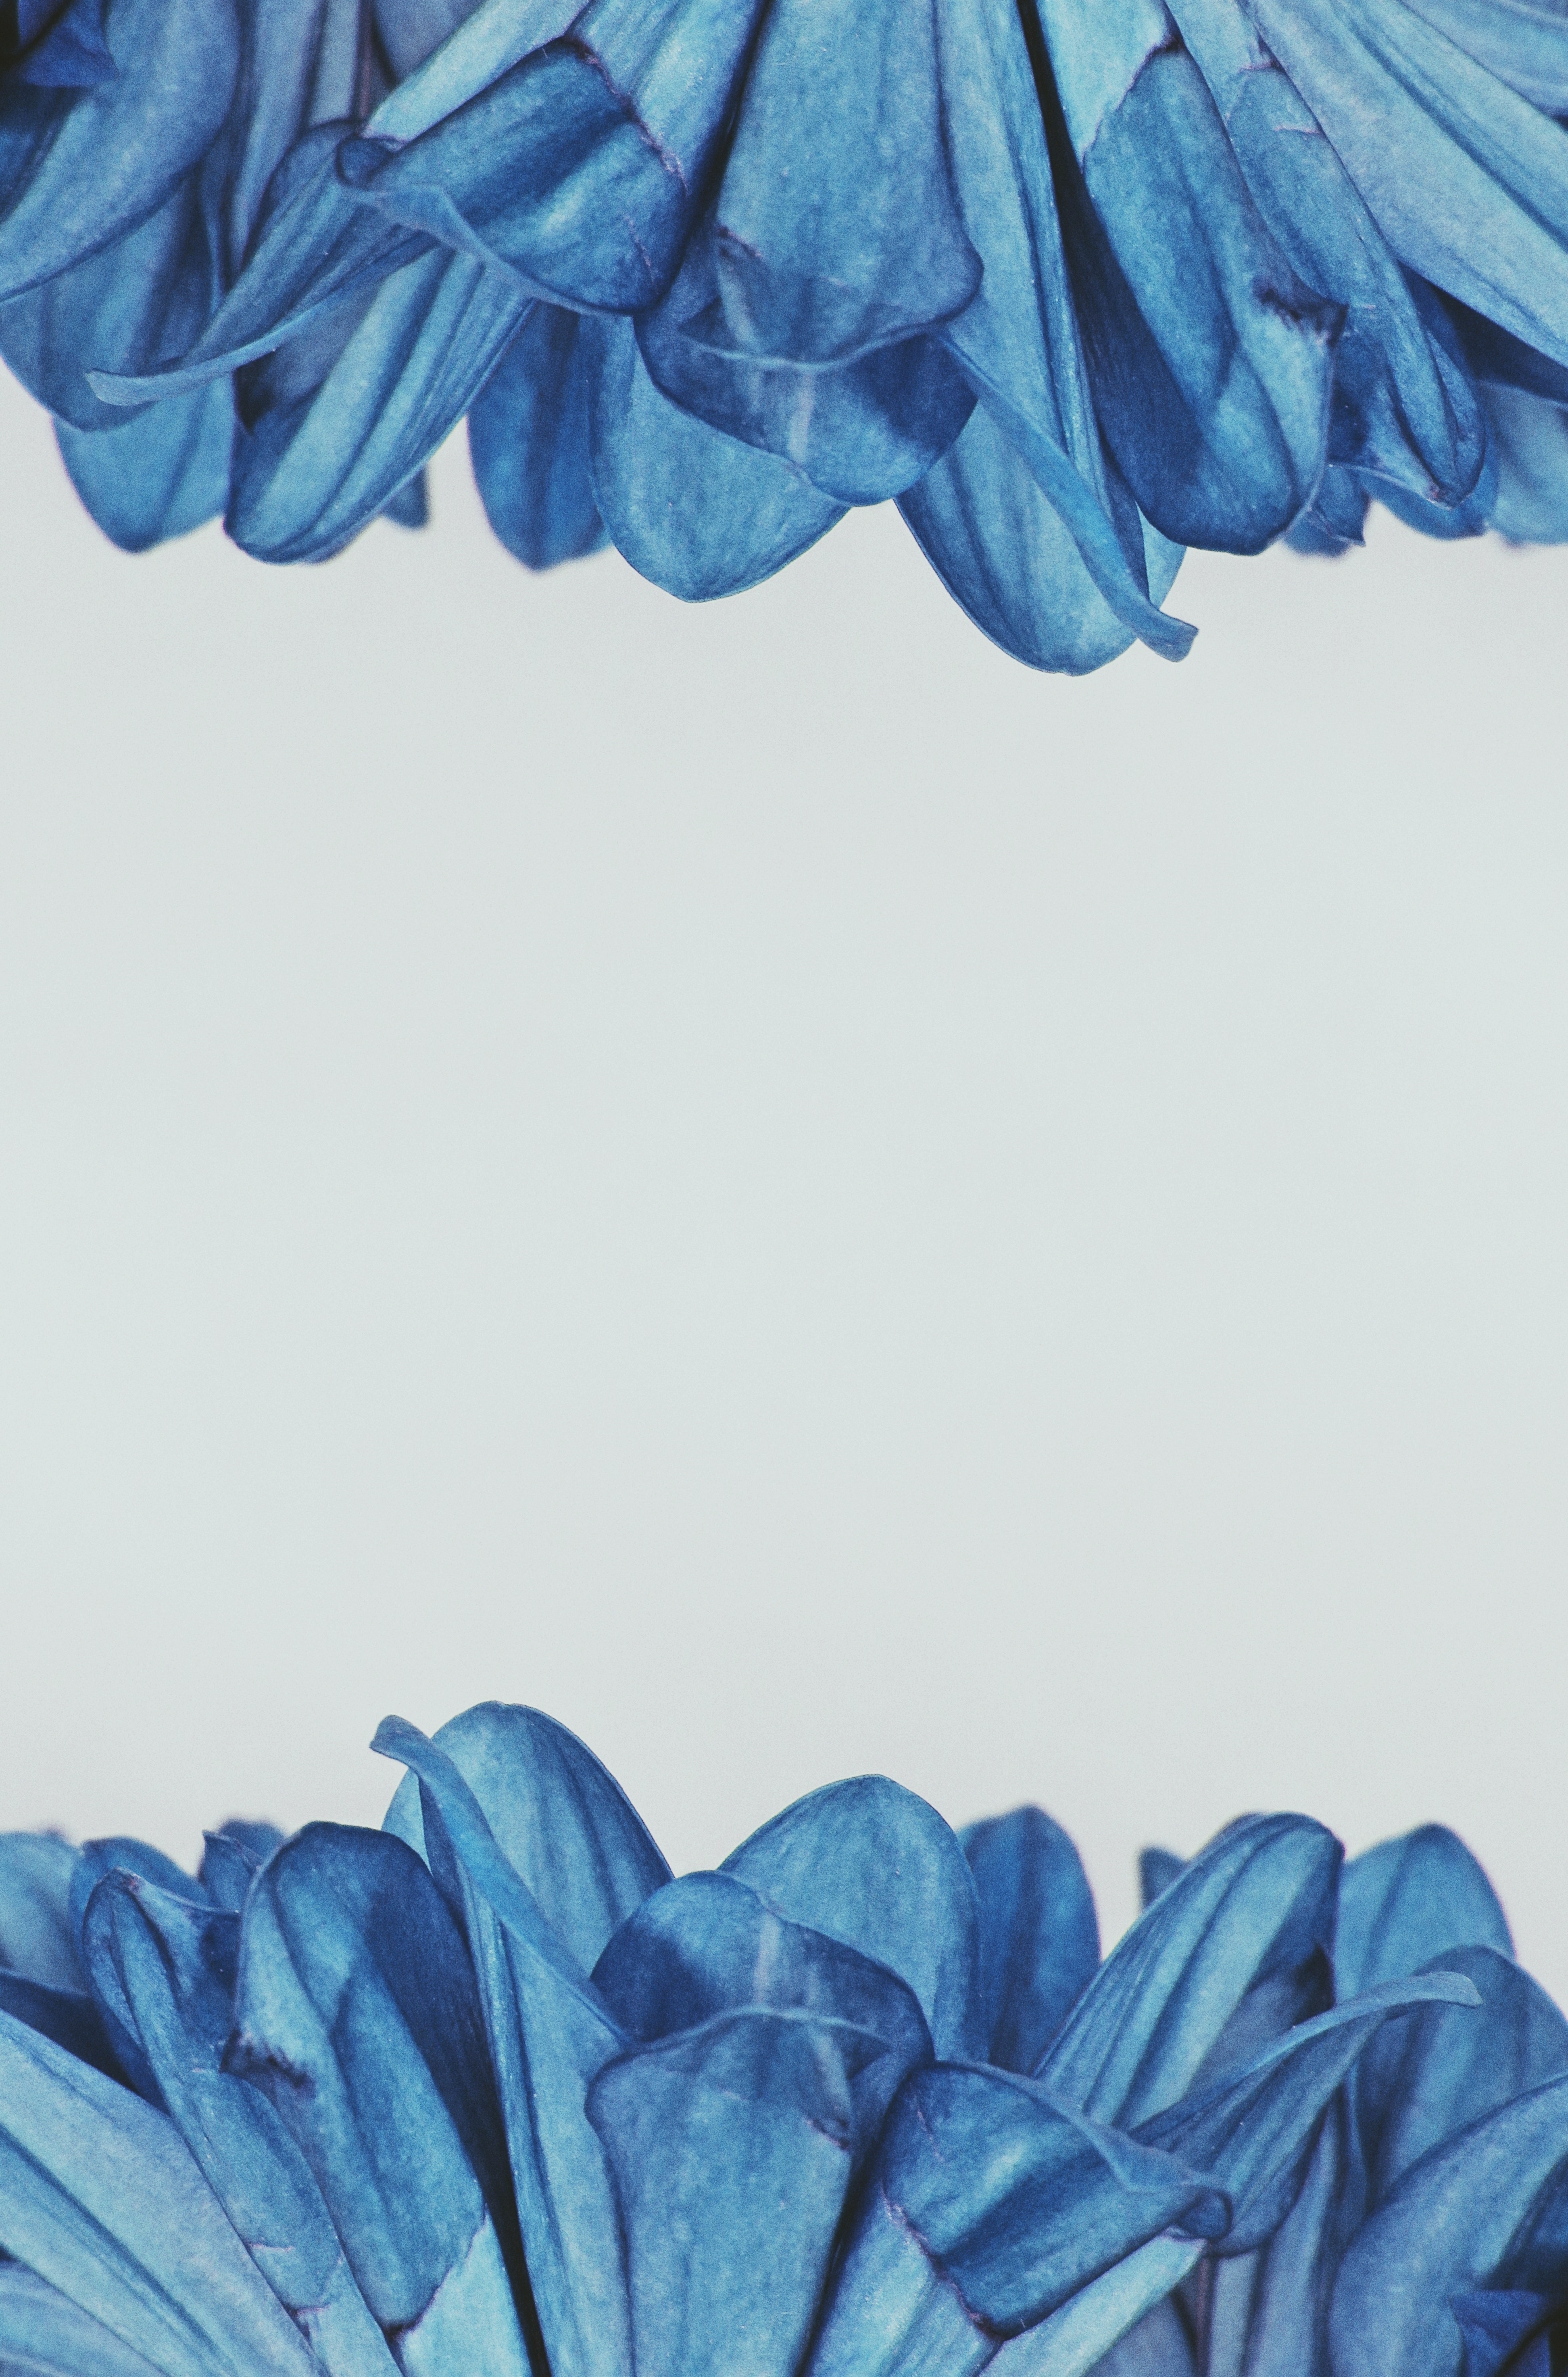 Blue Flowers Aesthetic Wallpapers